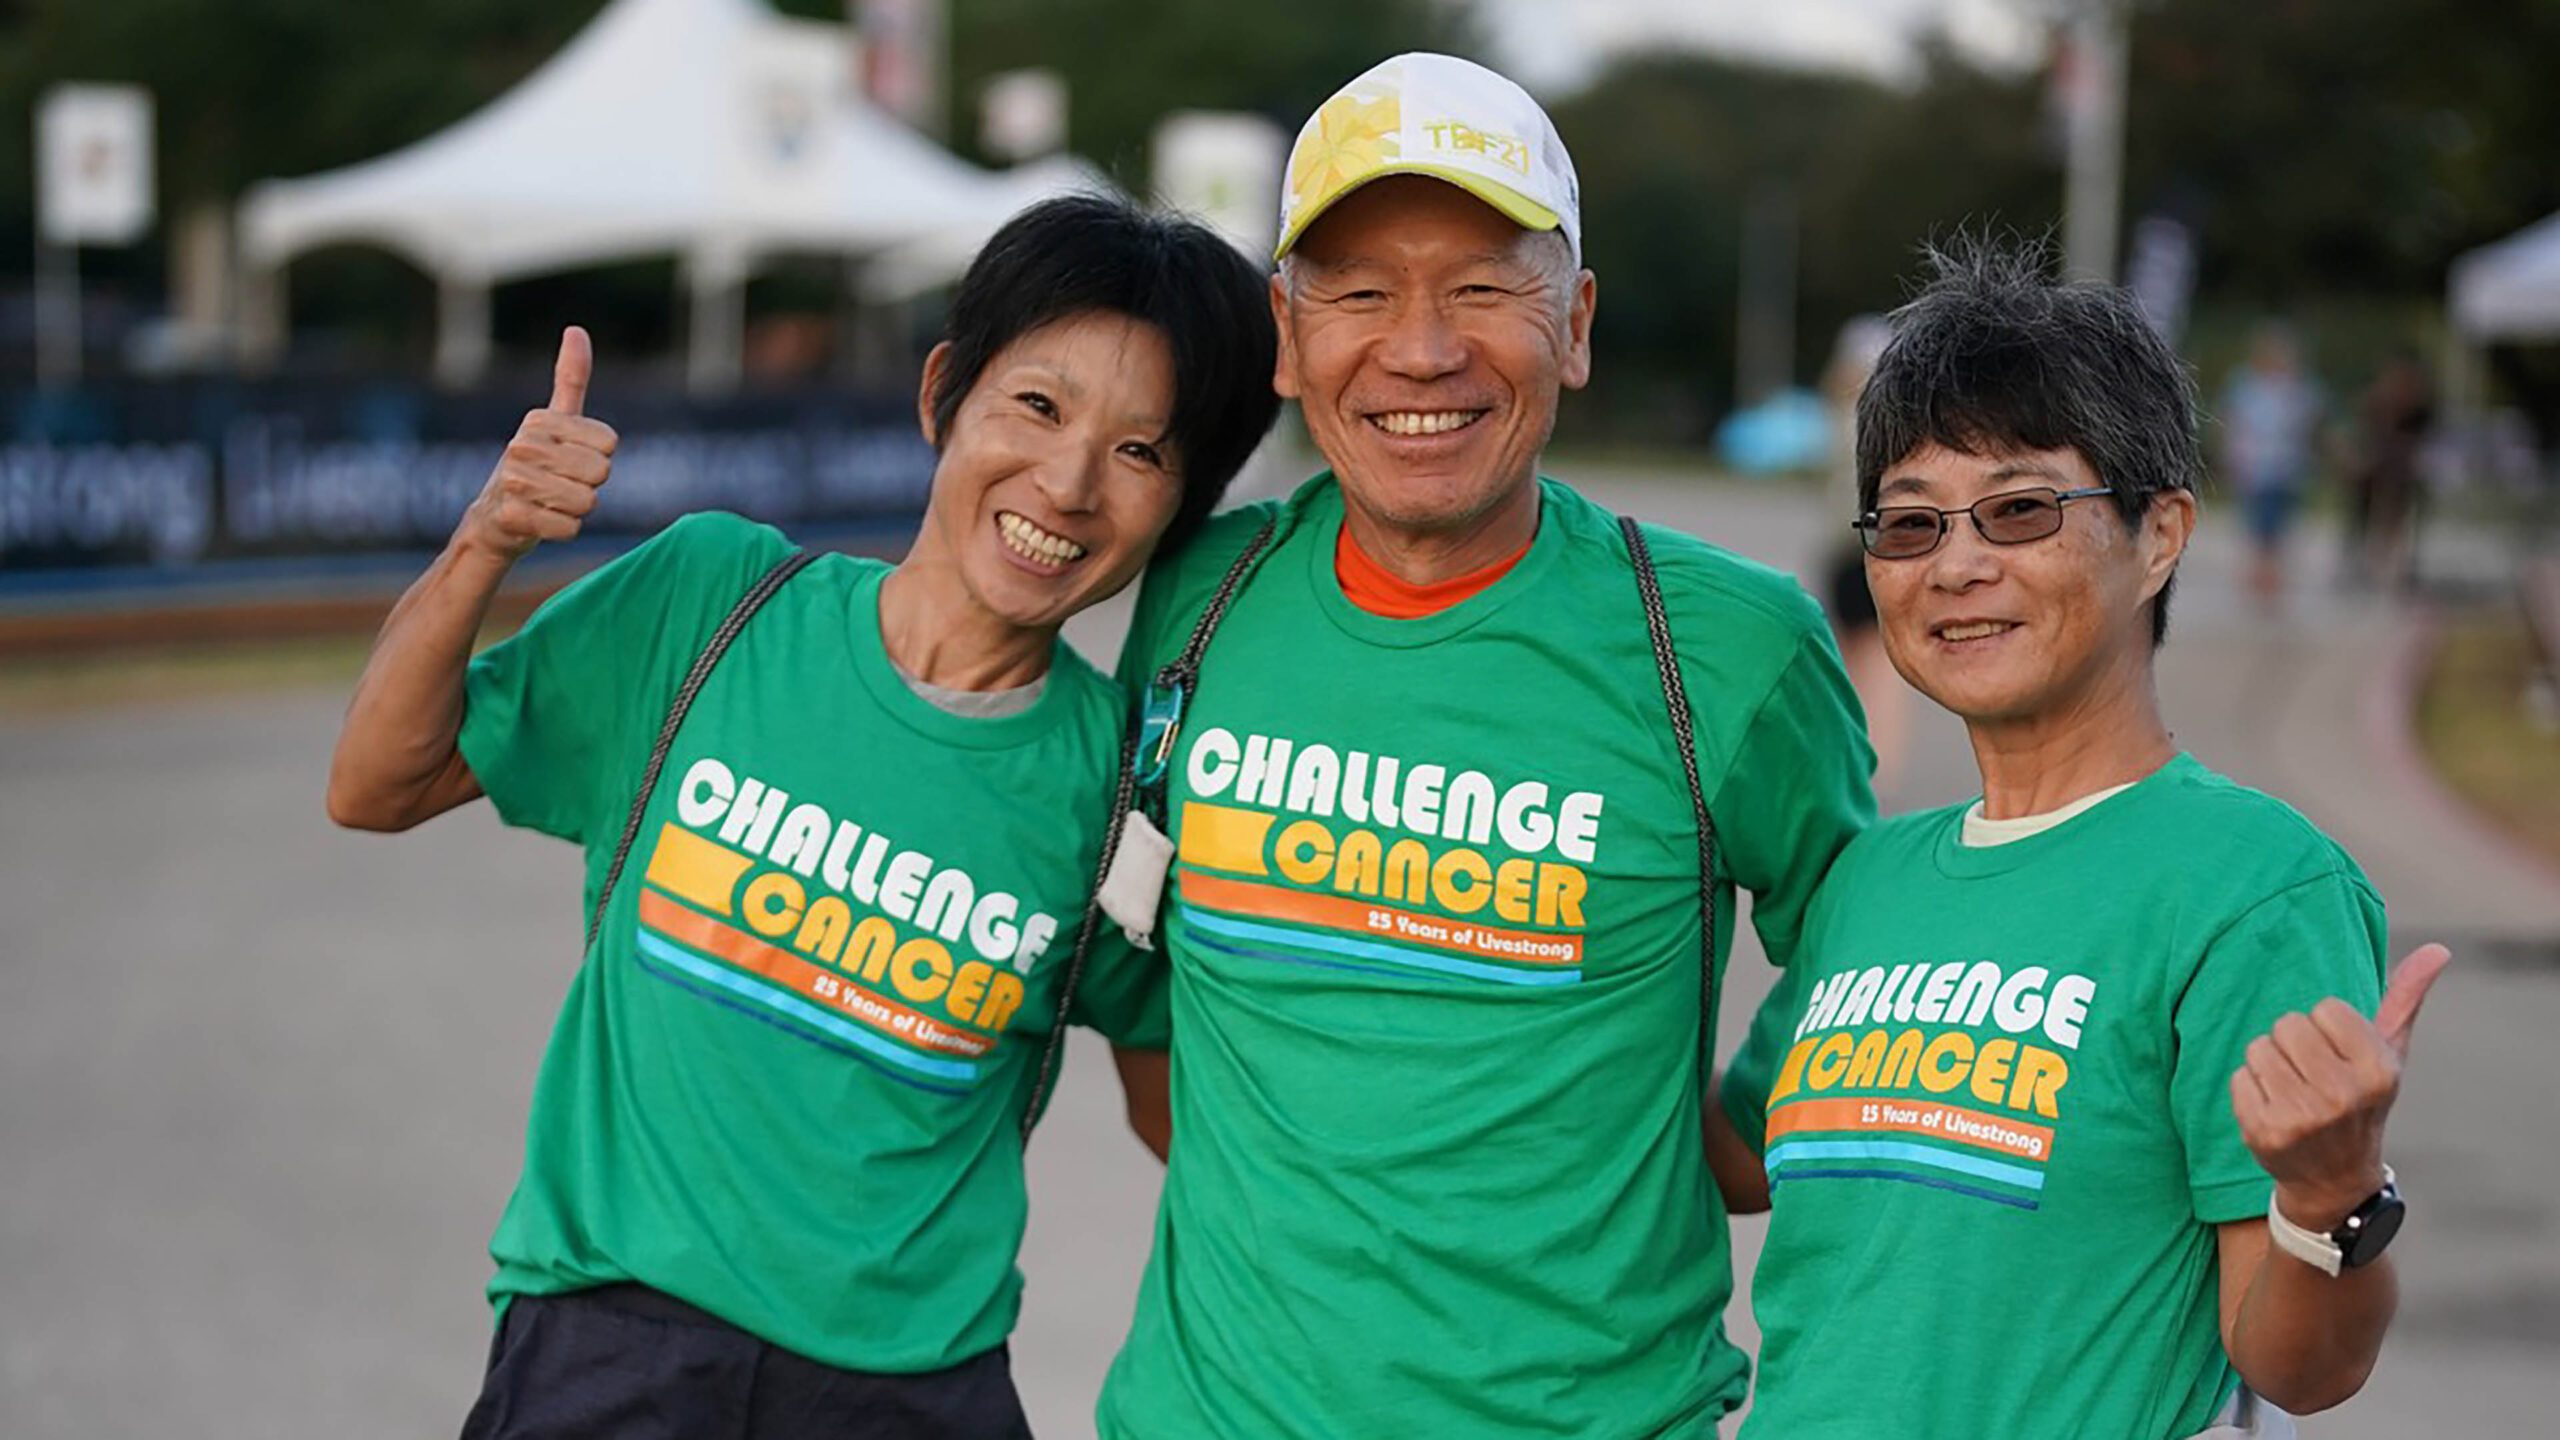 3 smiling adults wearing green "challenge cancer" shirts